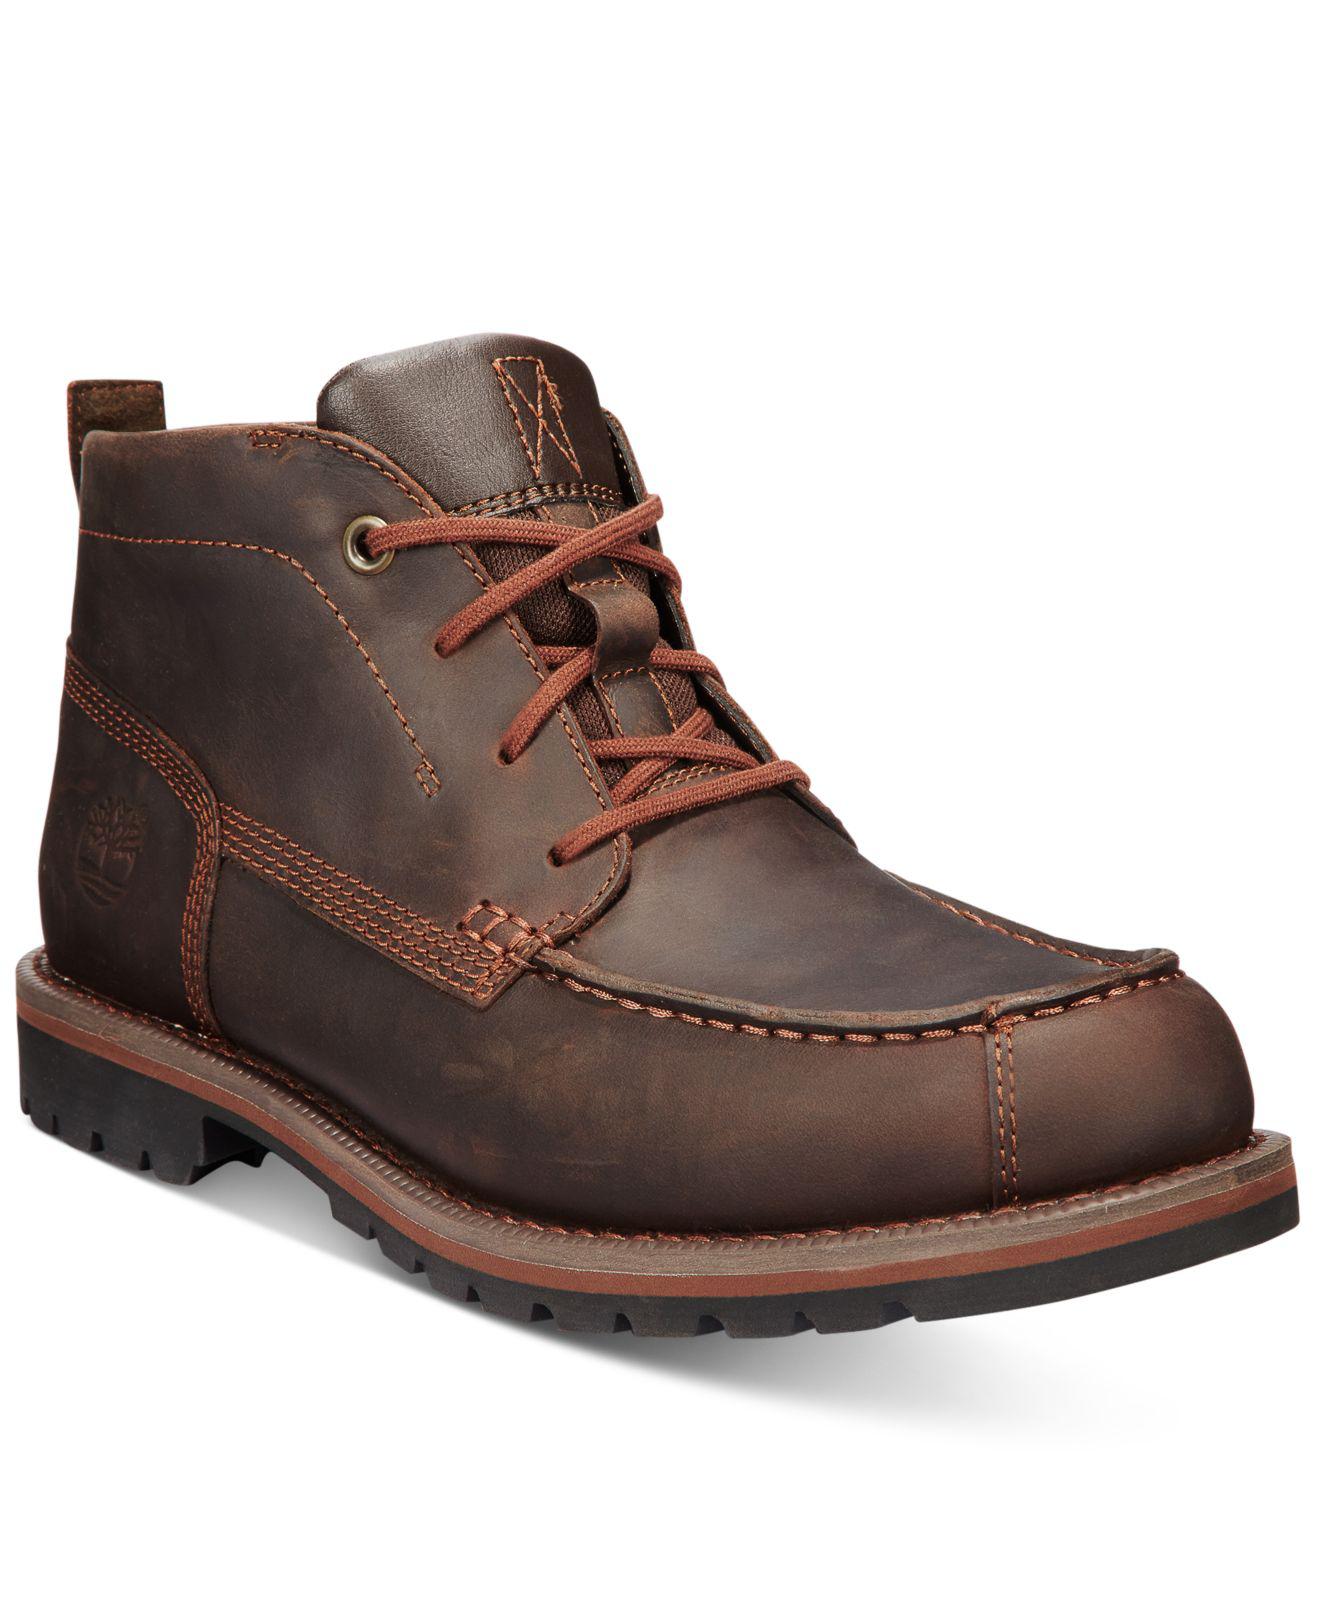 Lyst - Timberland Men's Grantly Mountain Chukka Boots in Brown for Men